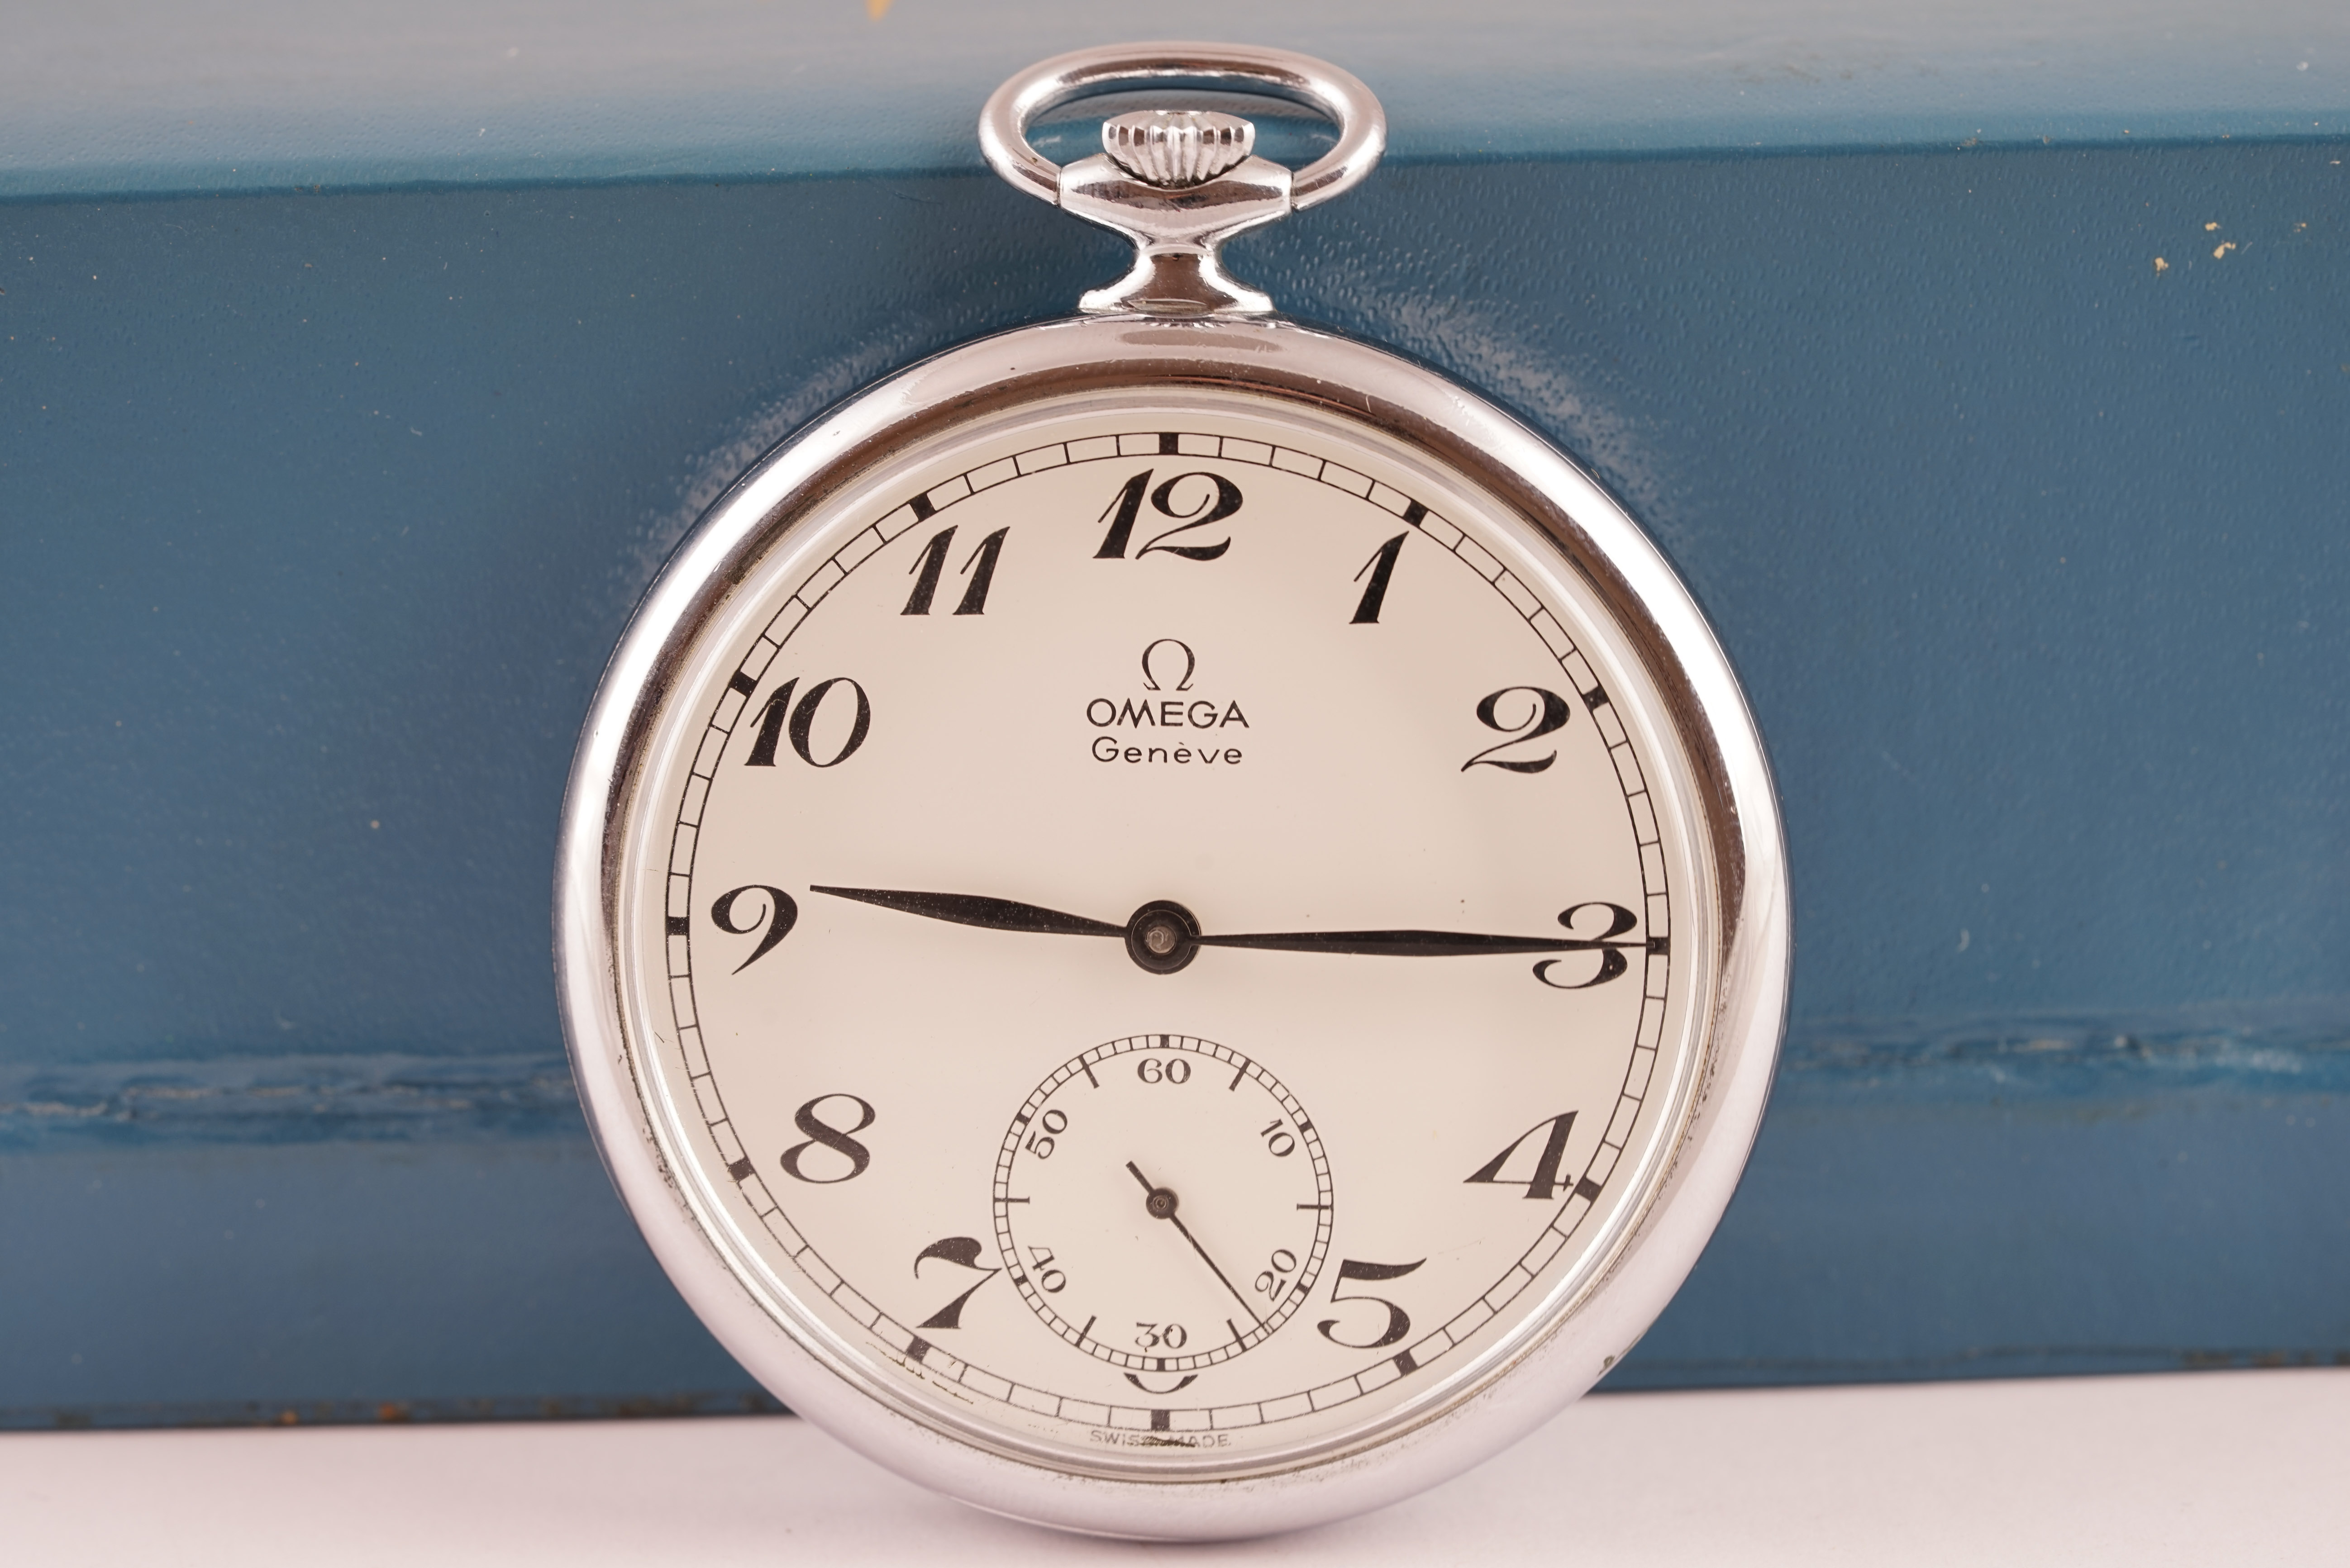 VINTAGE OMEGA POCKET WATCH CIRCA 1973, circular white dial with arabic numeral hour markers and